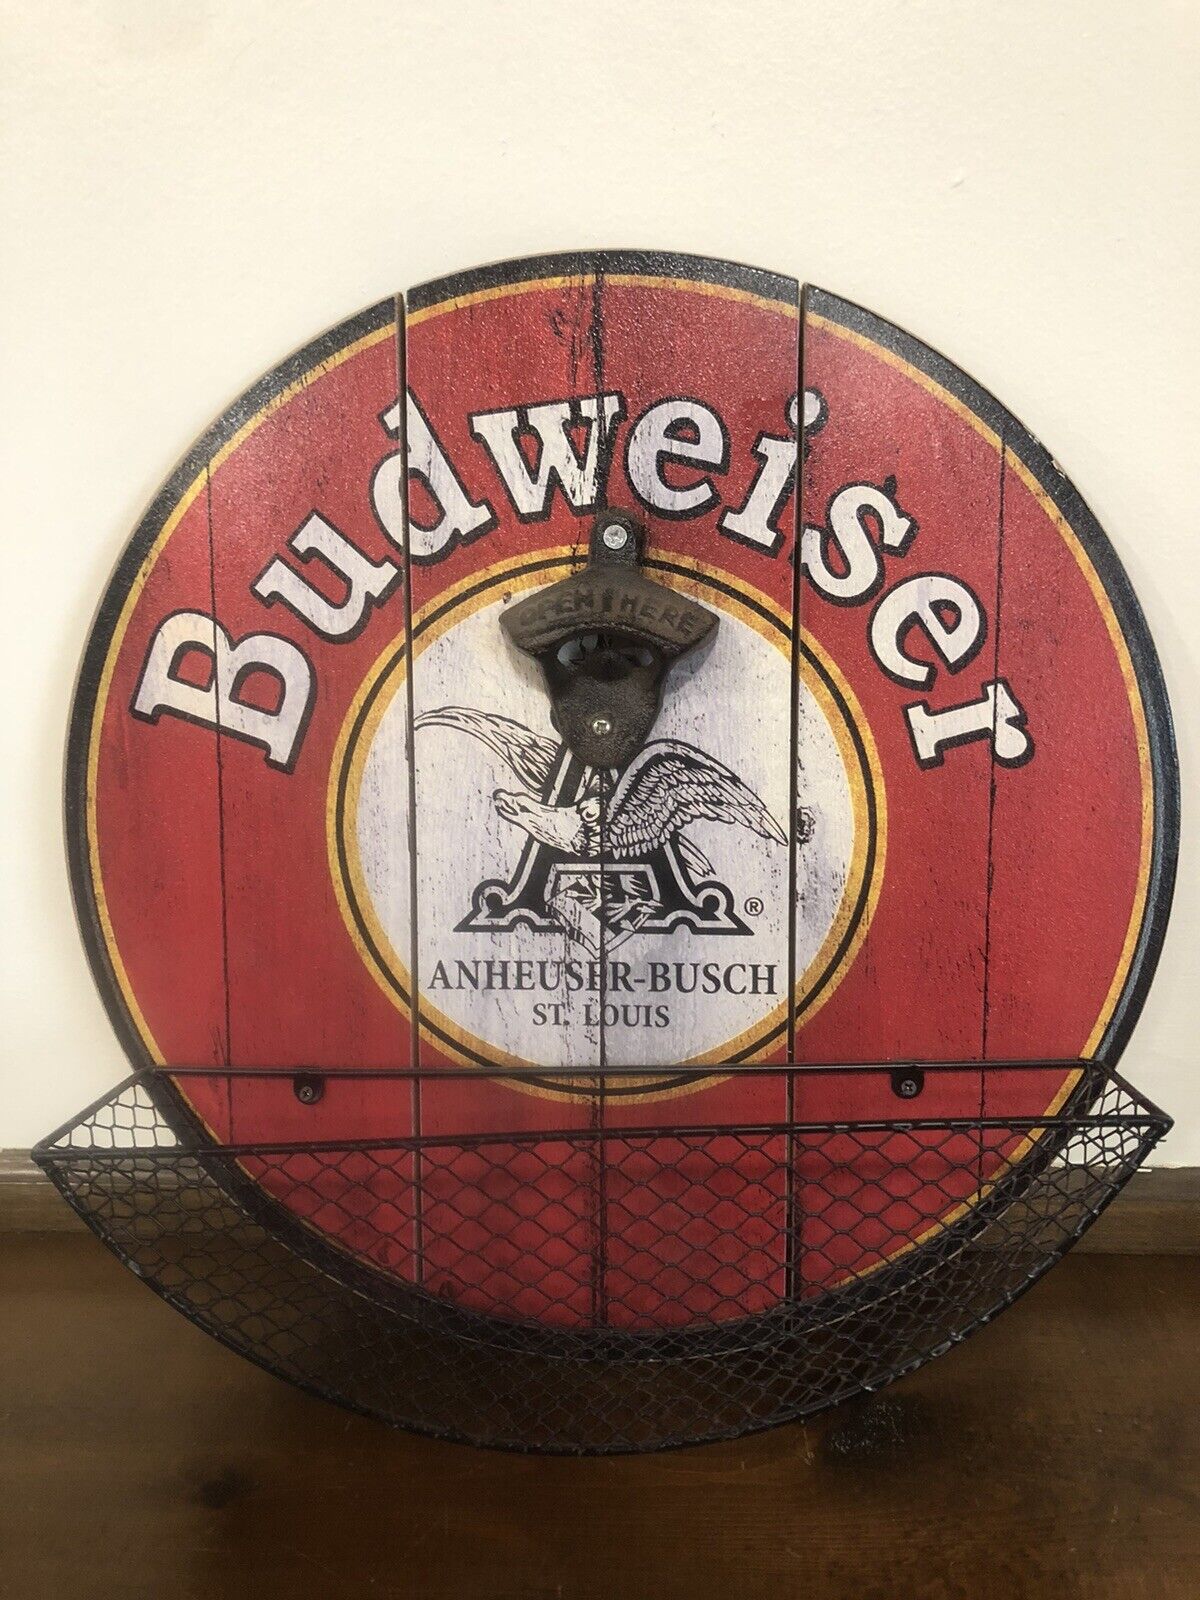 2018 Budweiser Bottle Opener And Basket On Sign Wood Composite About 14in Across